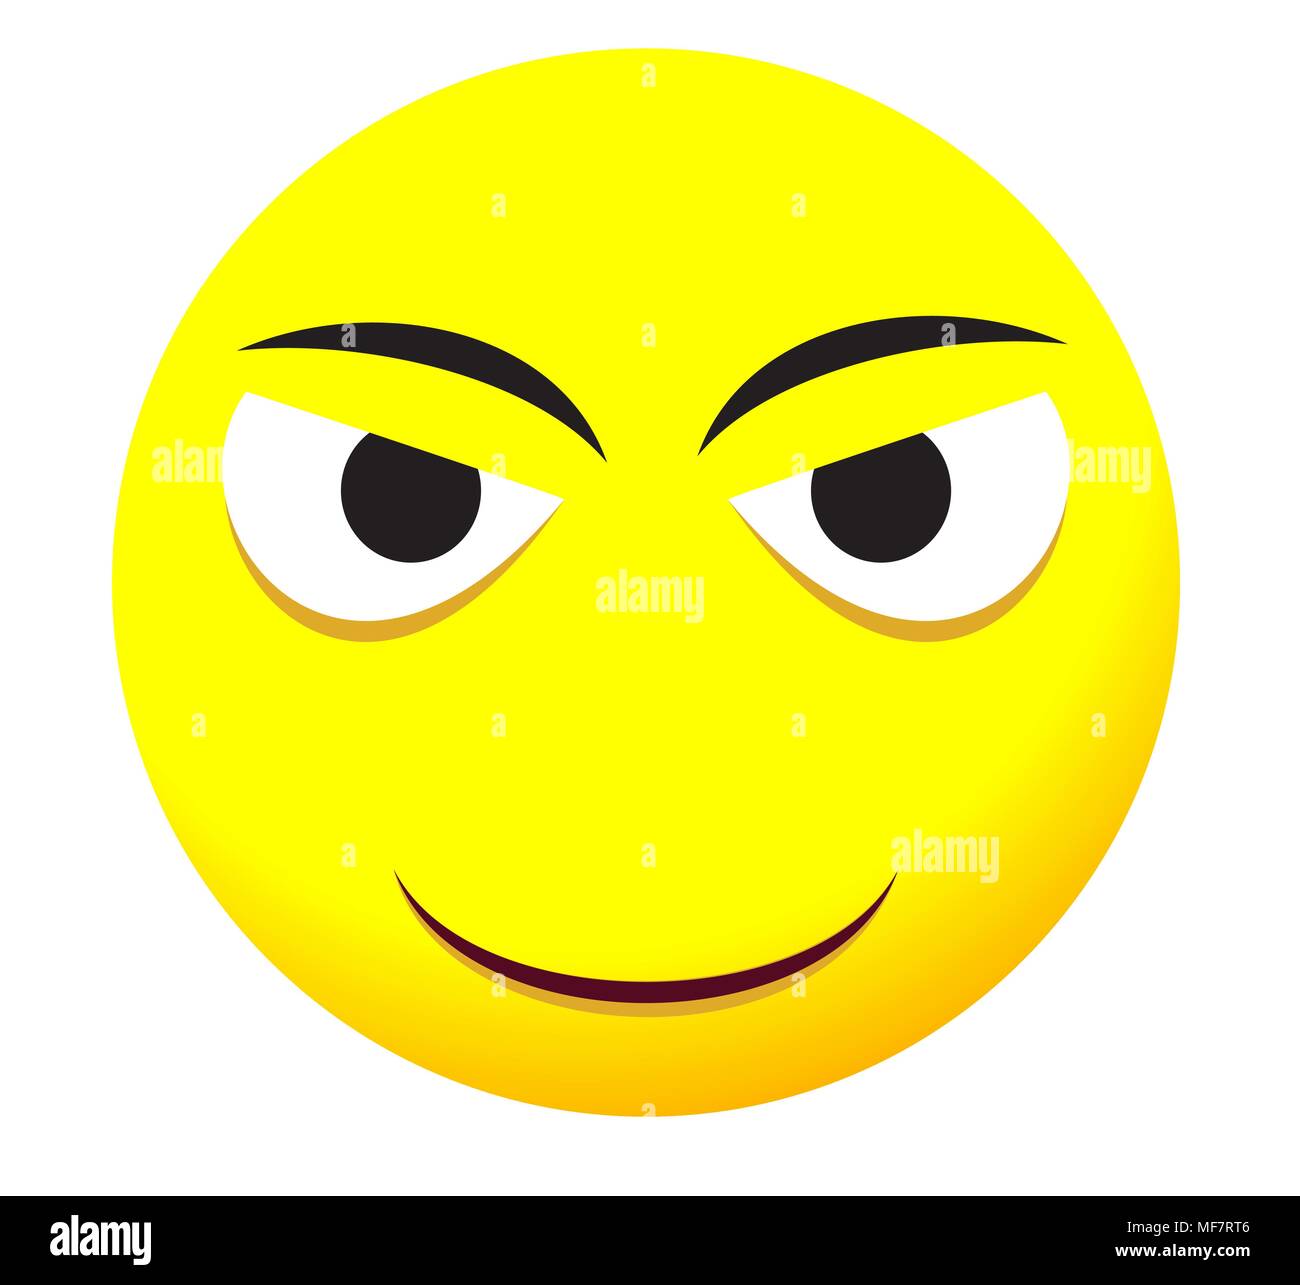 Emoji icon with emotional faces Stock Vector